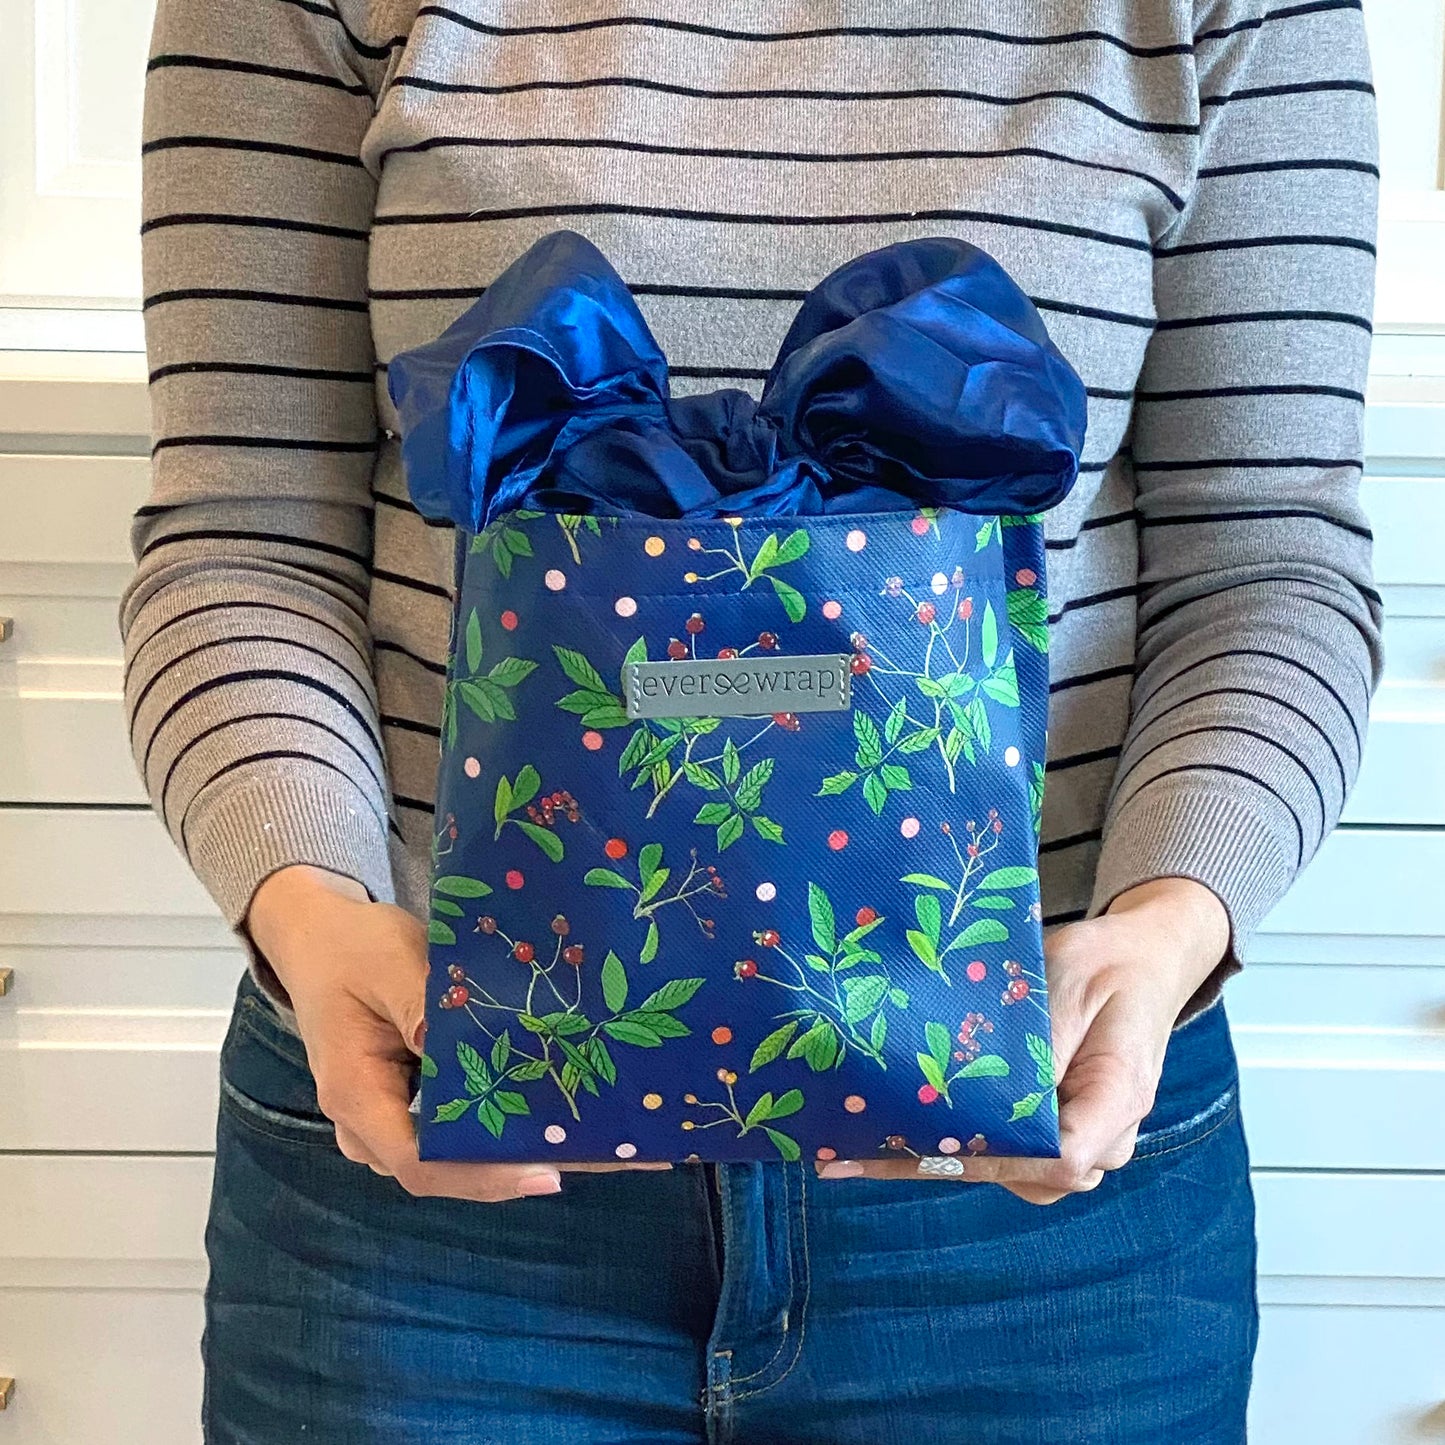 IRREGULAR - Blue Reusable gift bag, Berry and Green Foliage with Royal Blue Satin Bow makes storing and reusing this gift bag an easy sustainable zero-waste choice